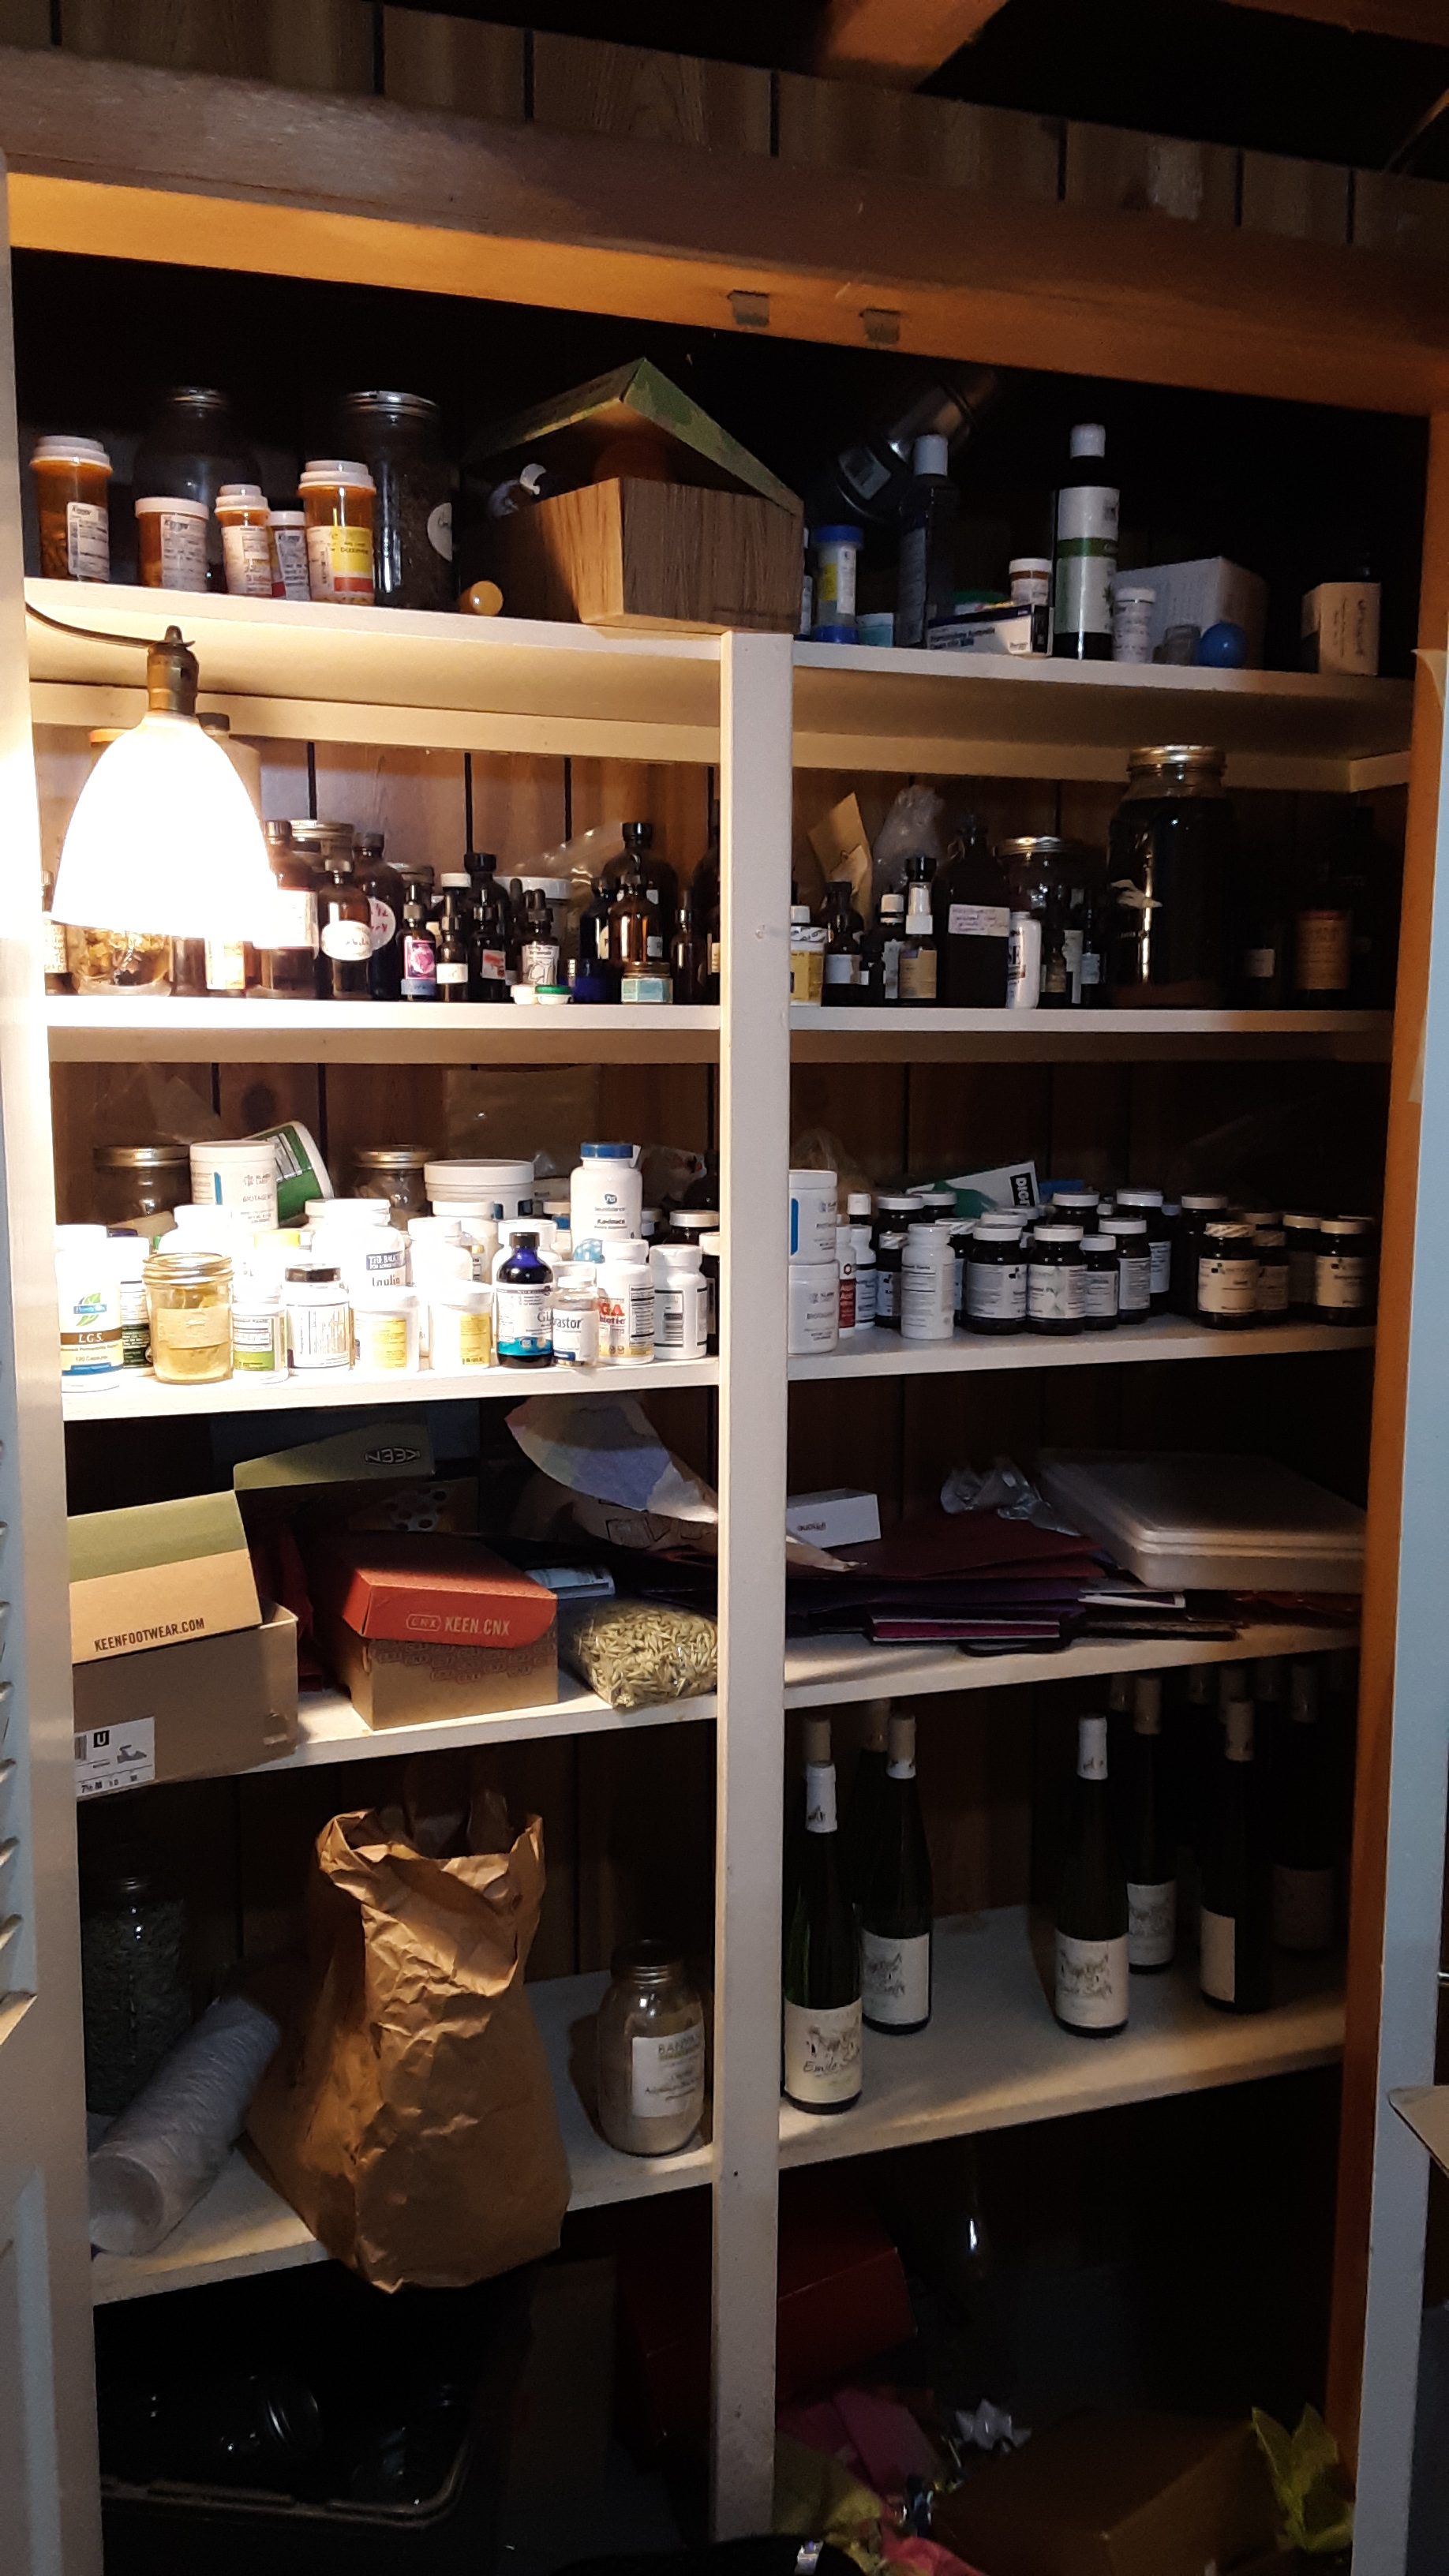 Basement Clutter – Medicines and Remedies “Treated”!